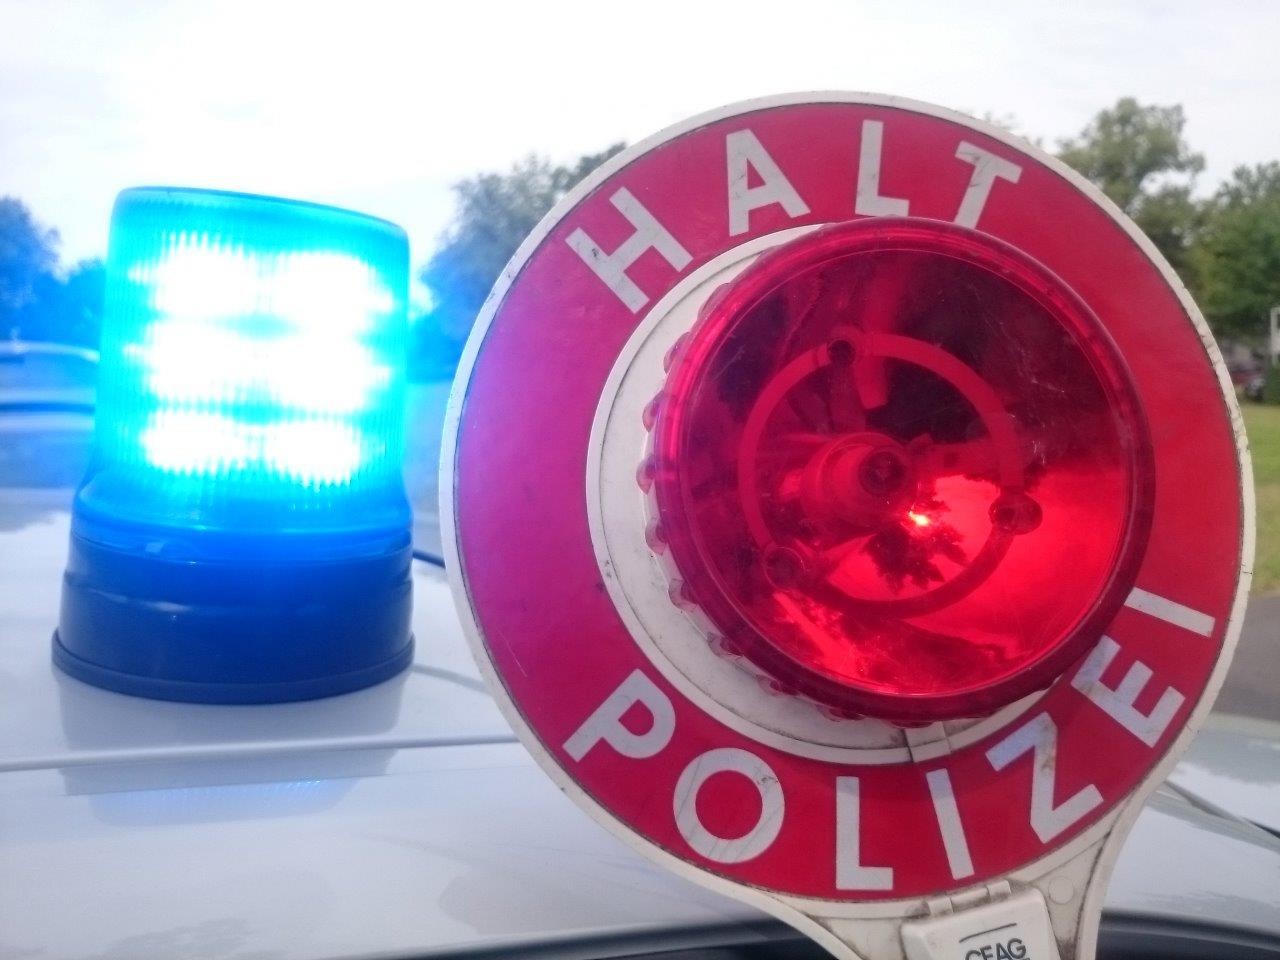 What to know if you get pulled over in Germany | Article | The United ...